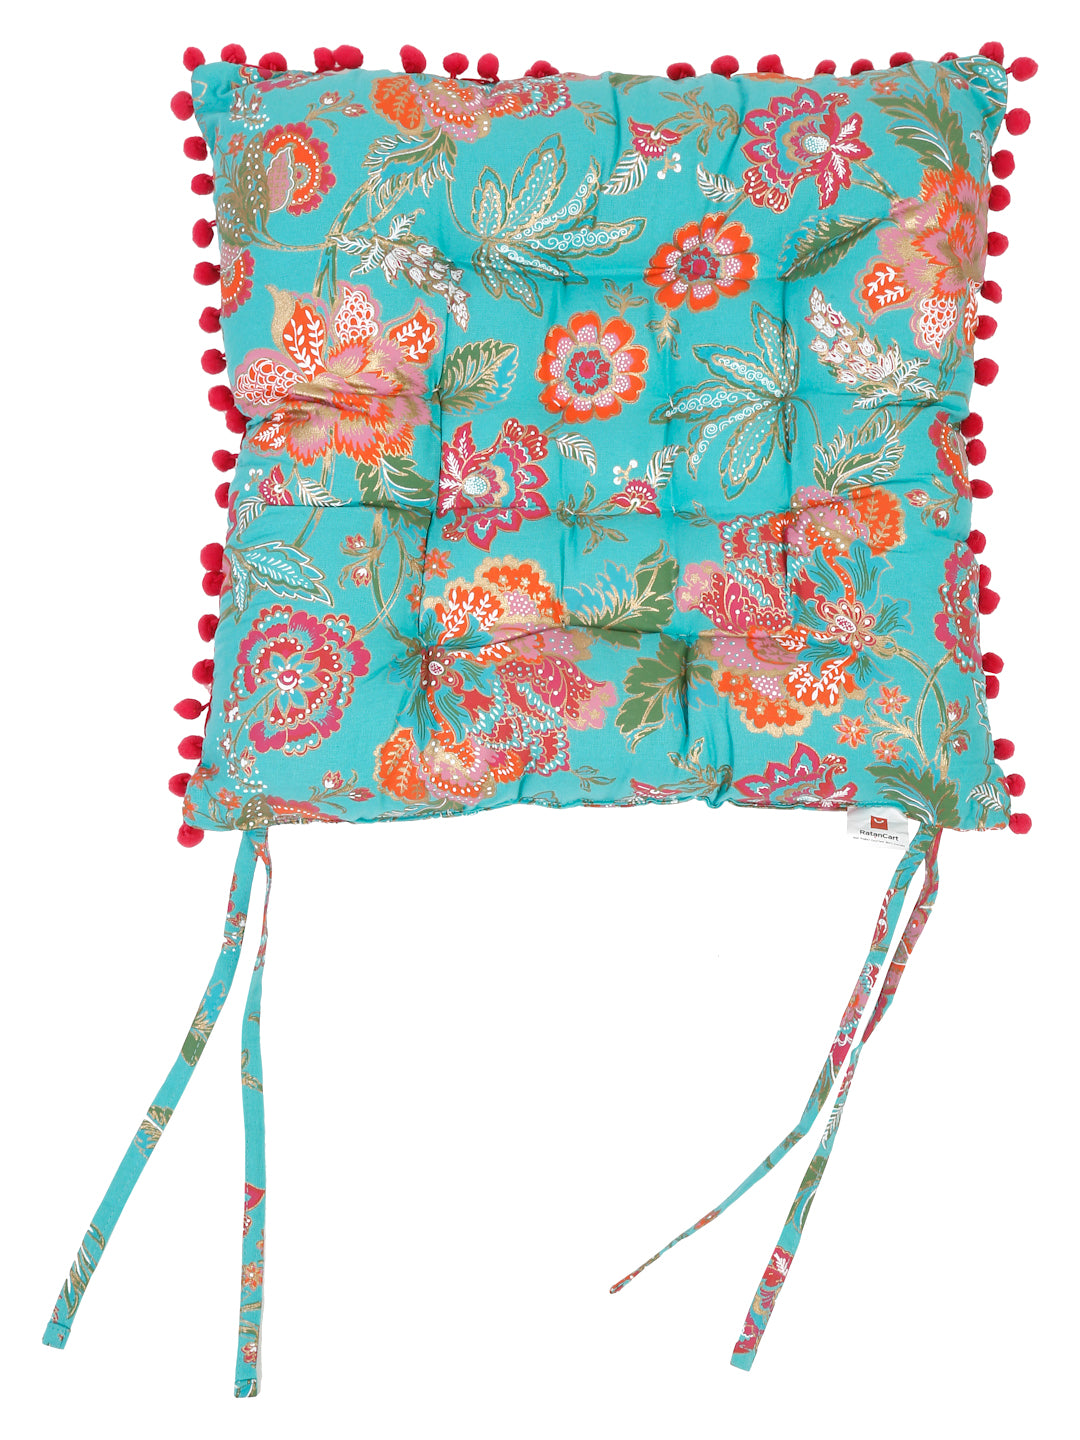 Comfy chair pad featuring a charming blue floral print accented with fluffy red pom poms, perfect for bringing a touch of cottagecore style indoors.